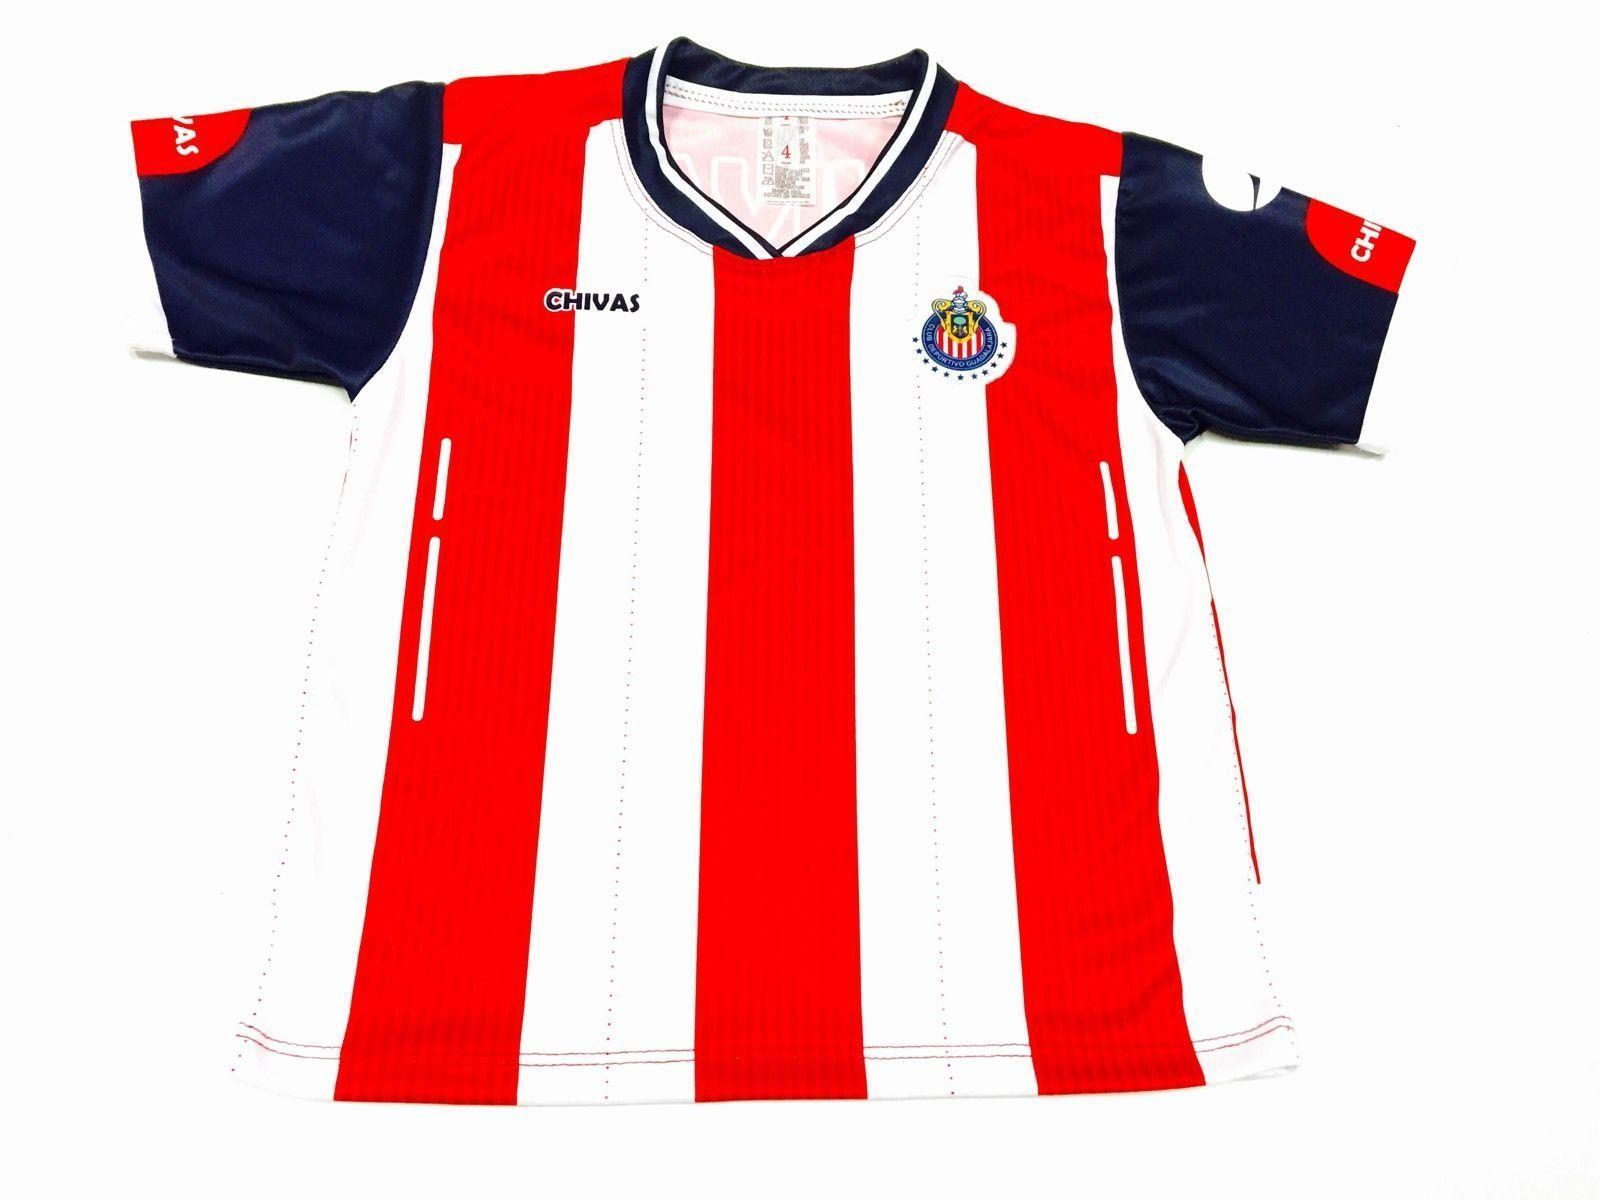 CHIVAS Jersey 2016 2017 Outfit For Kids Size 12